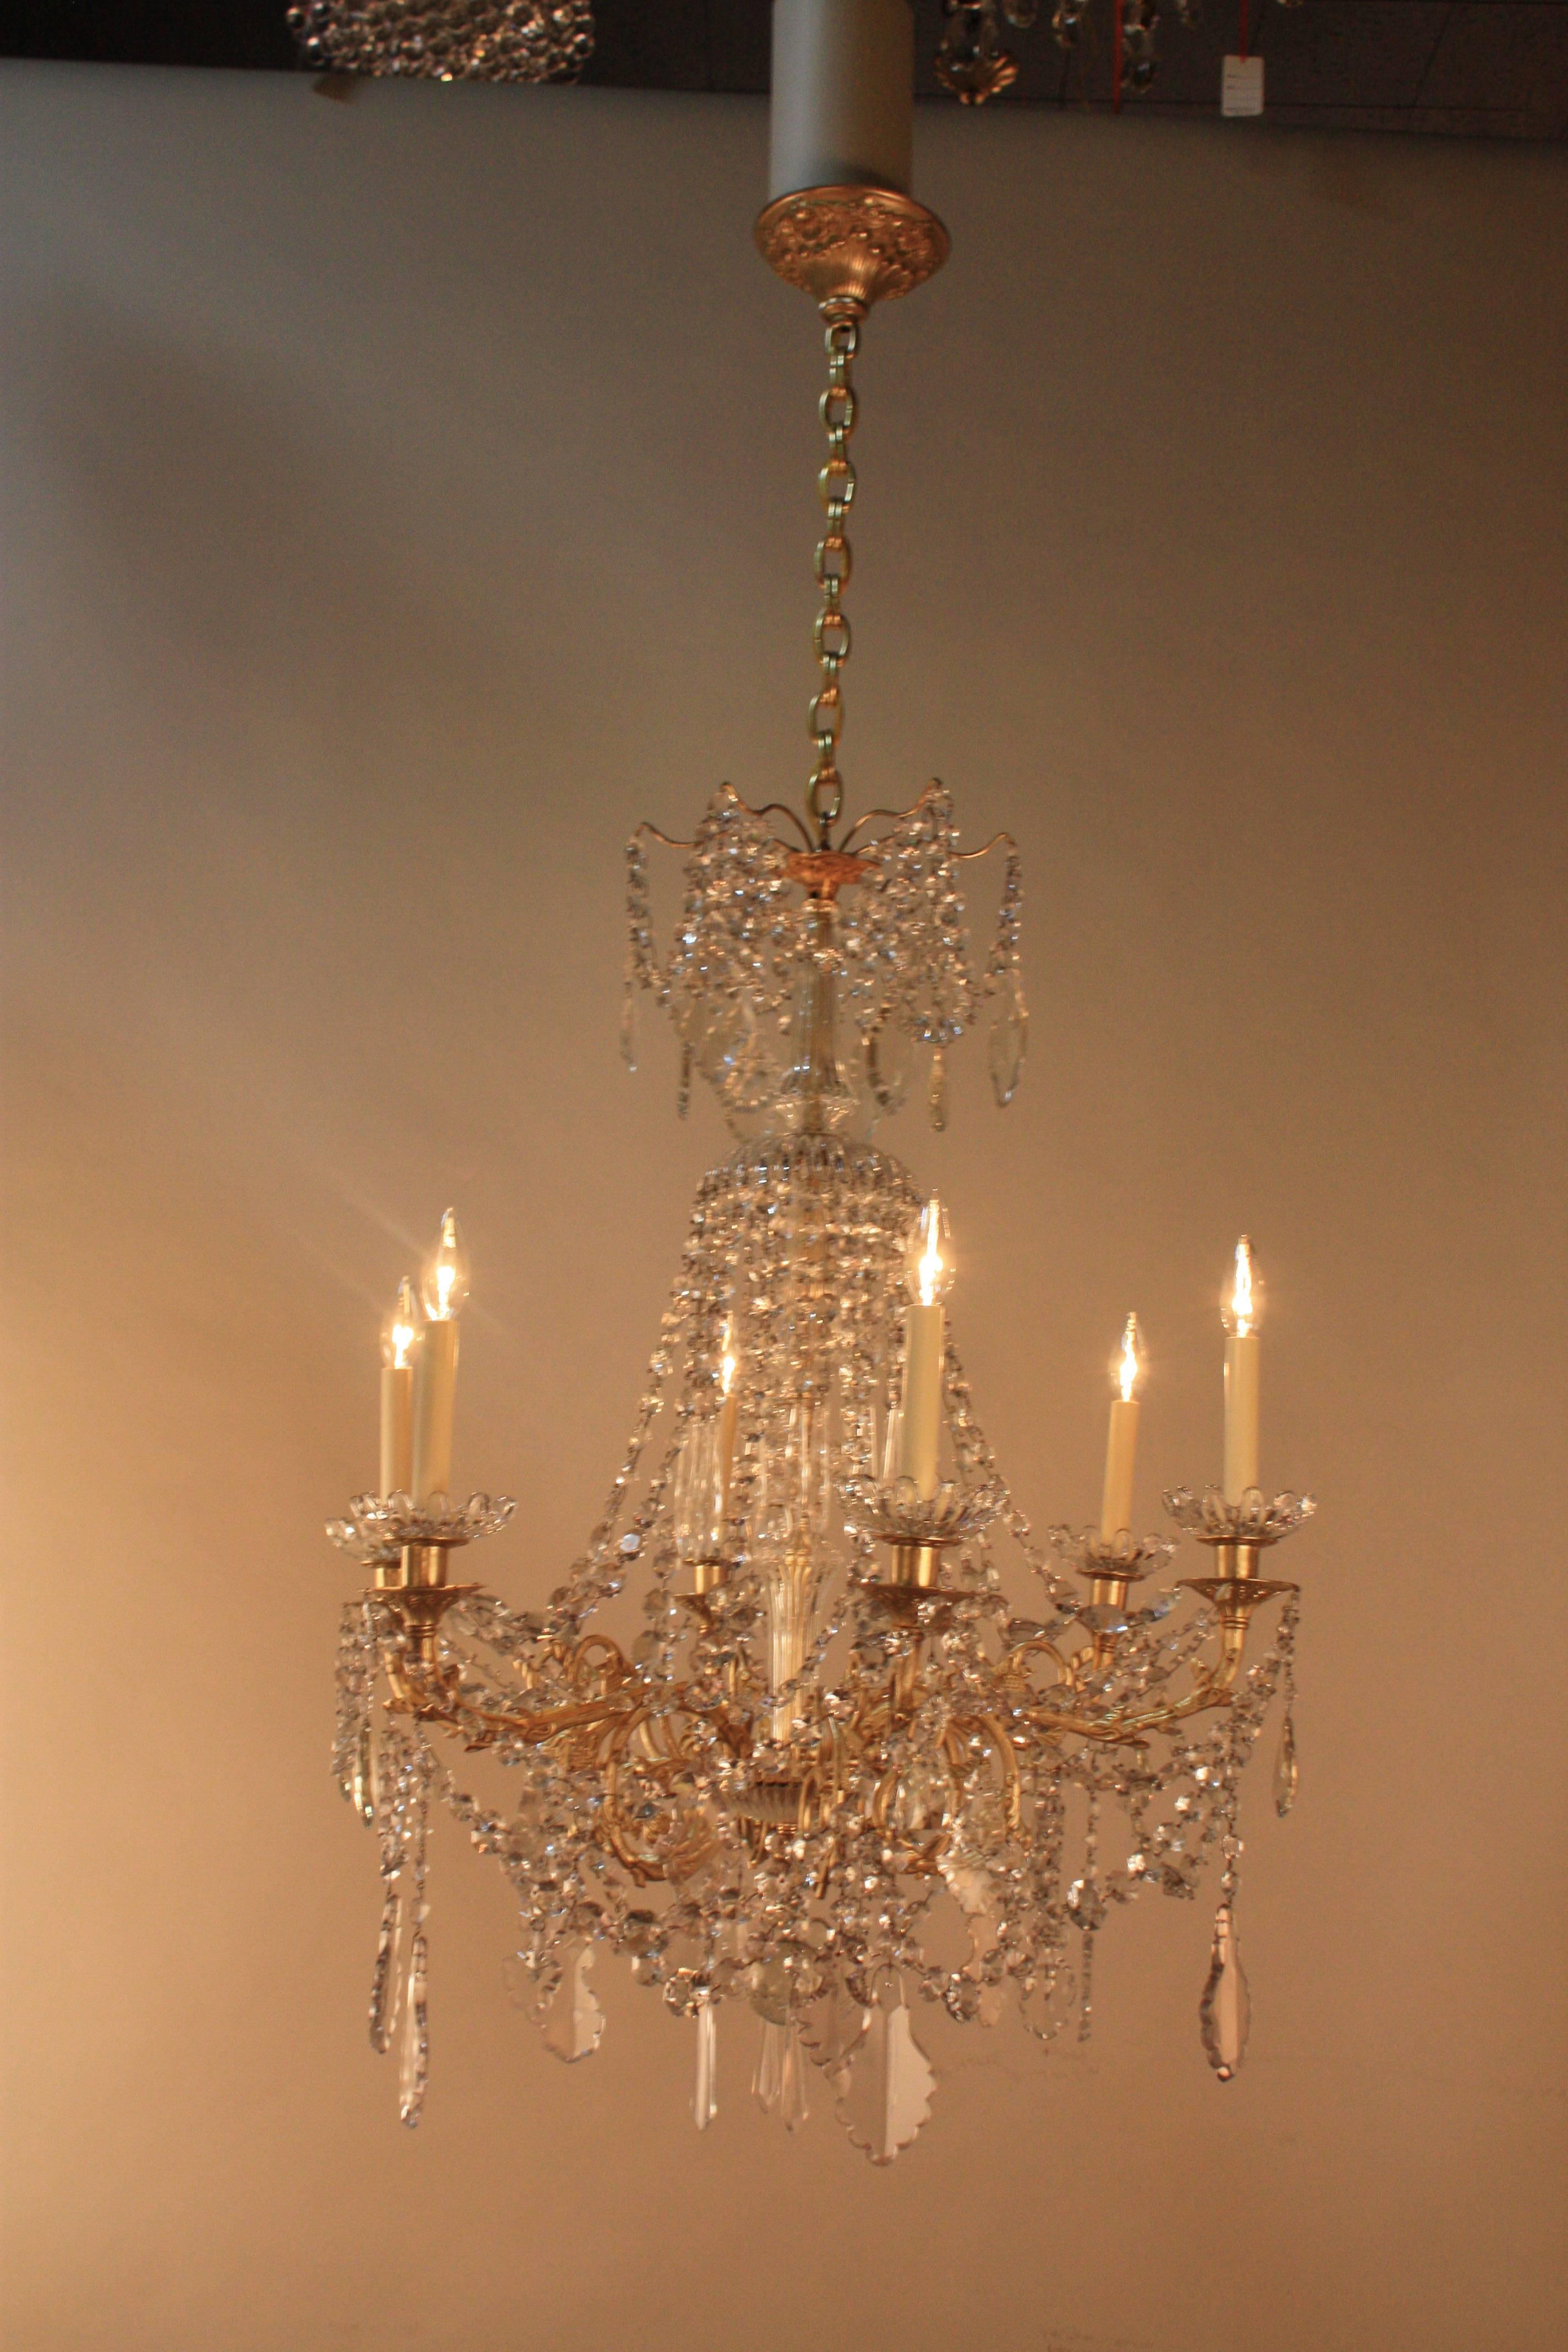 A stunning 19th century French six-light Baccarat crystal and bronze chandelier. This elegant chandelier was candle burning that has been electrified.
Measures: Total body height 37